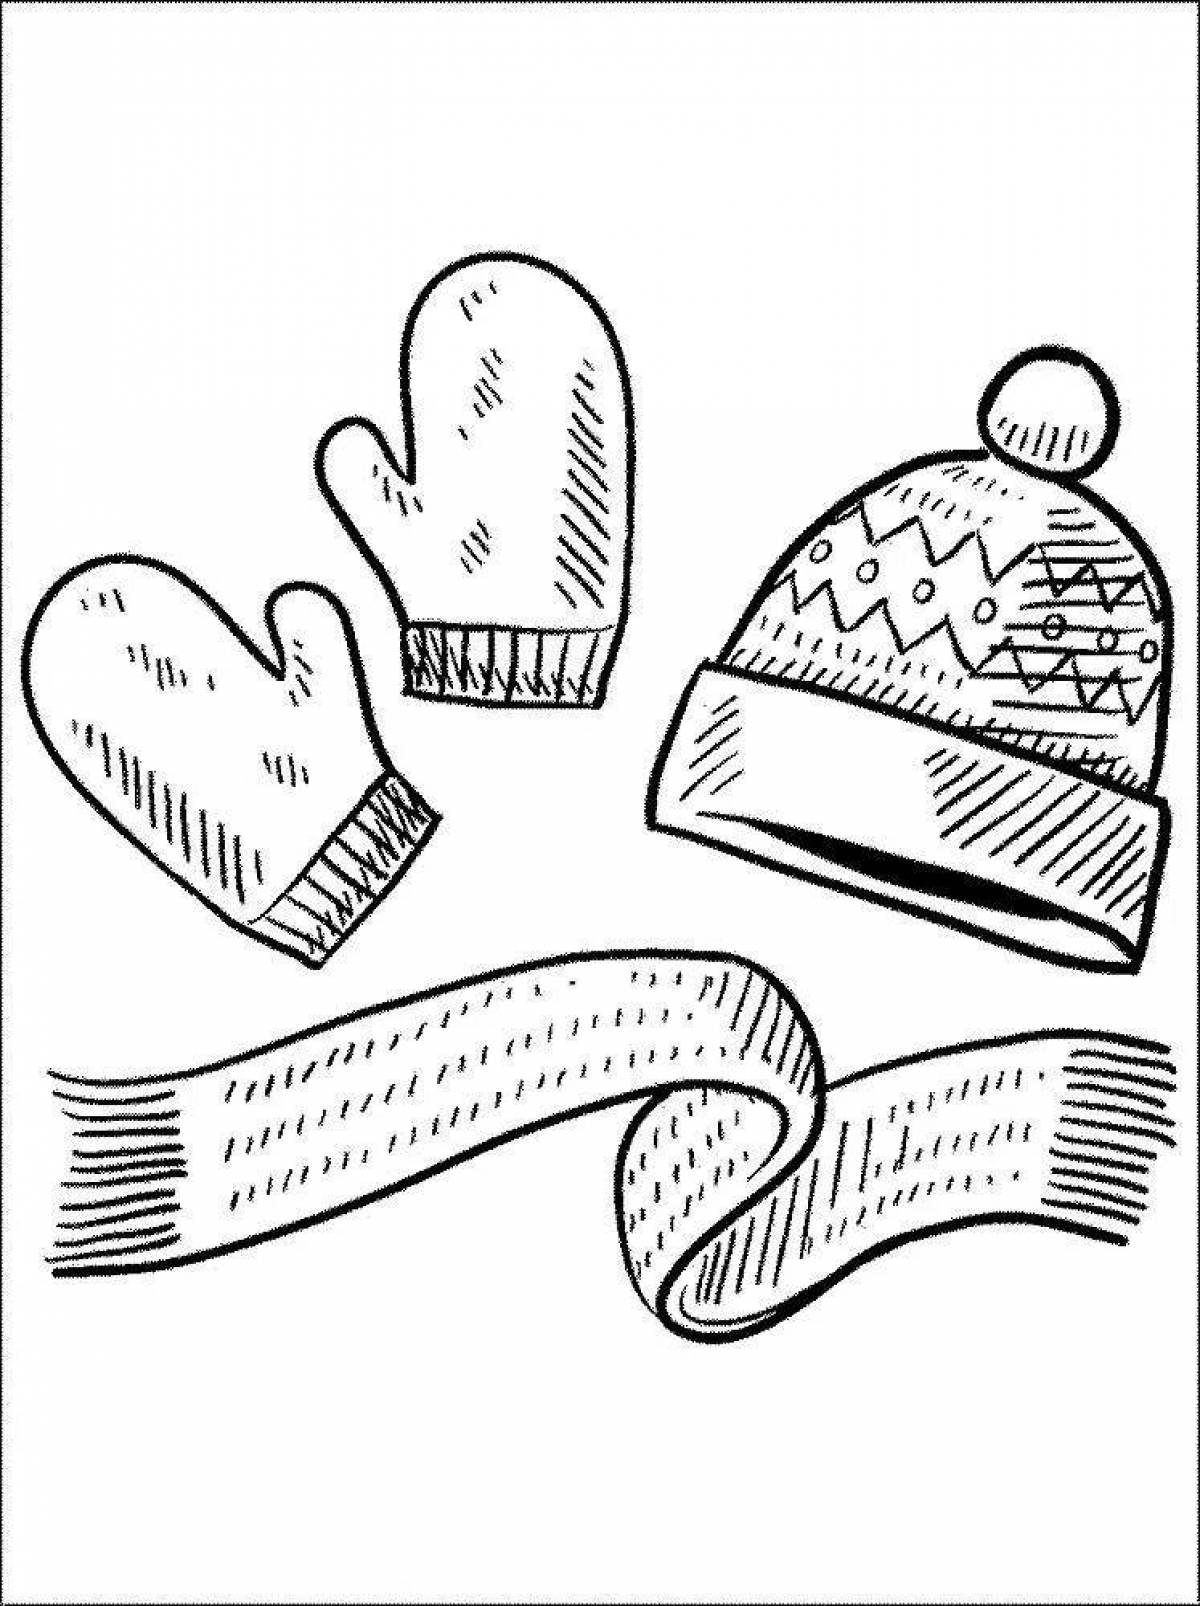 A fun hat and scarf coloring book for kids